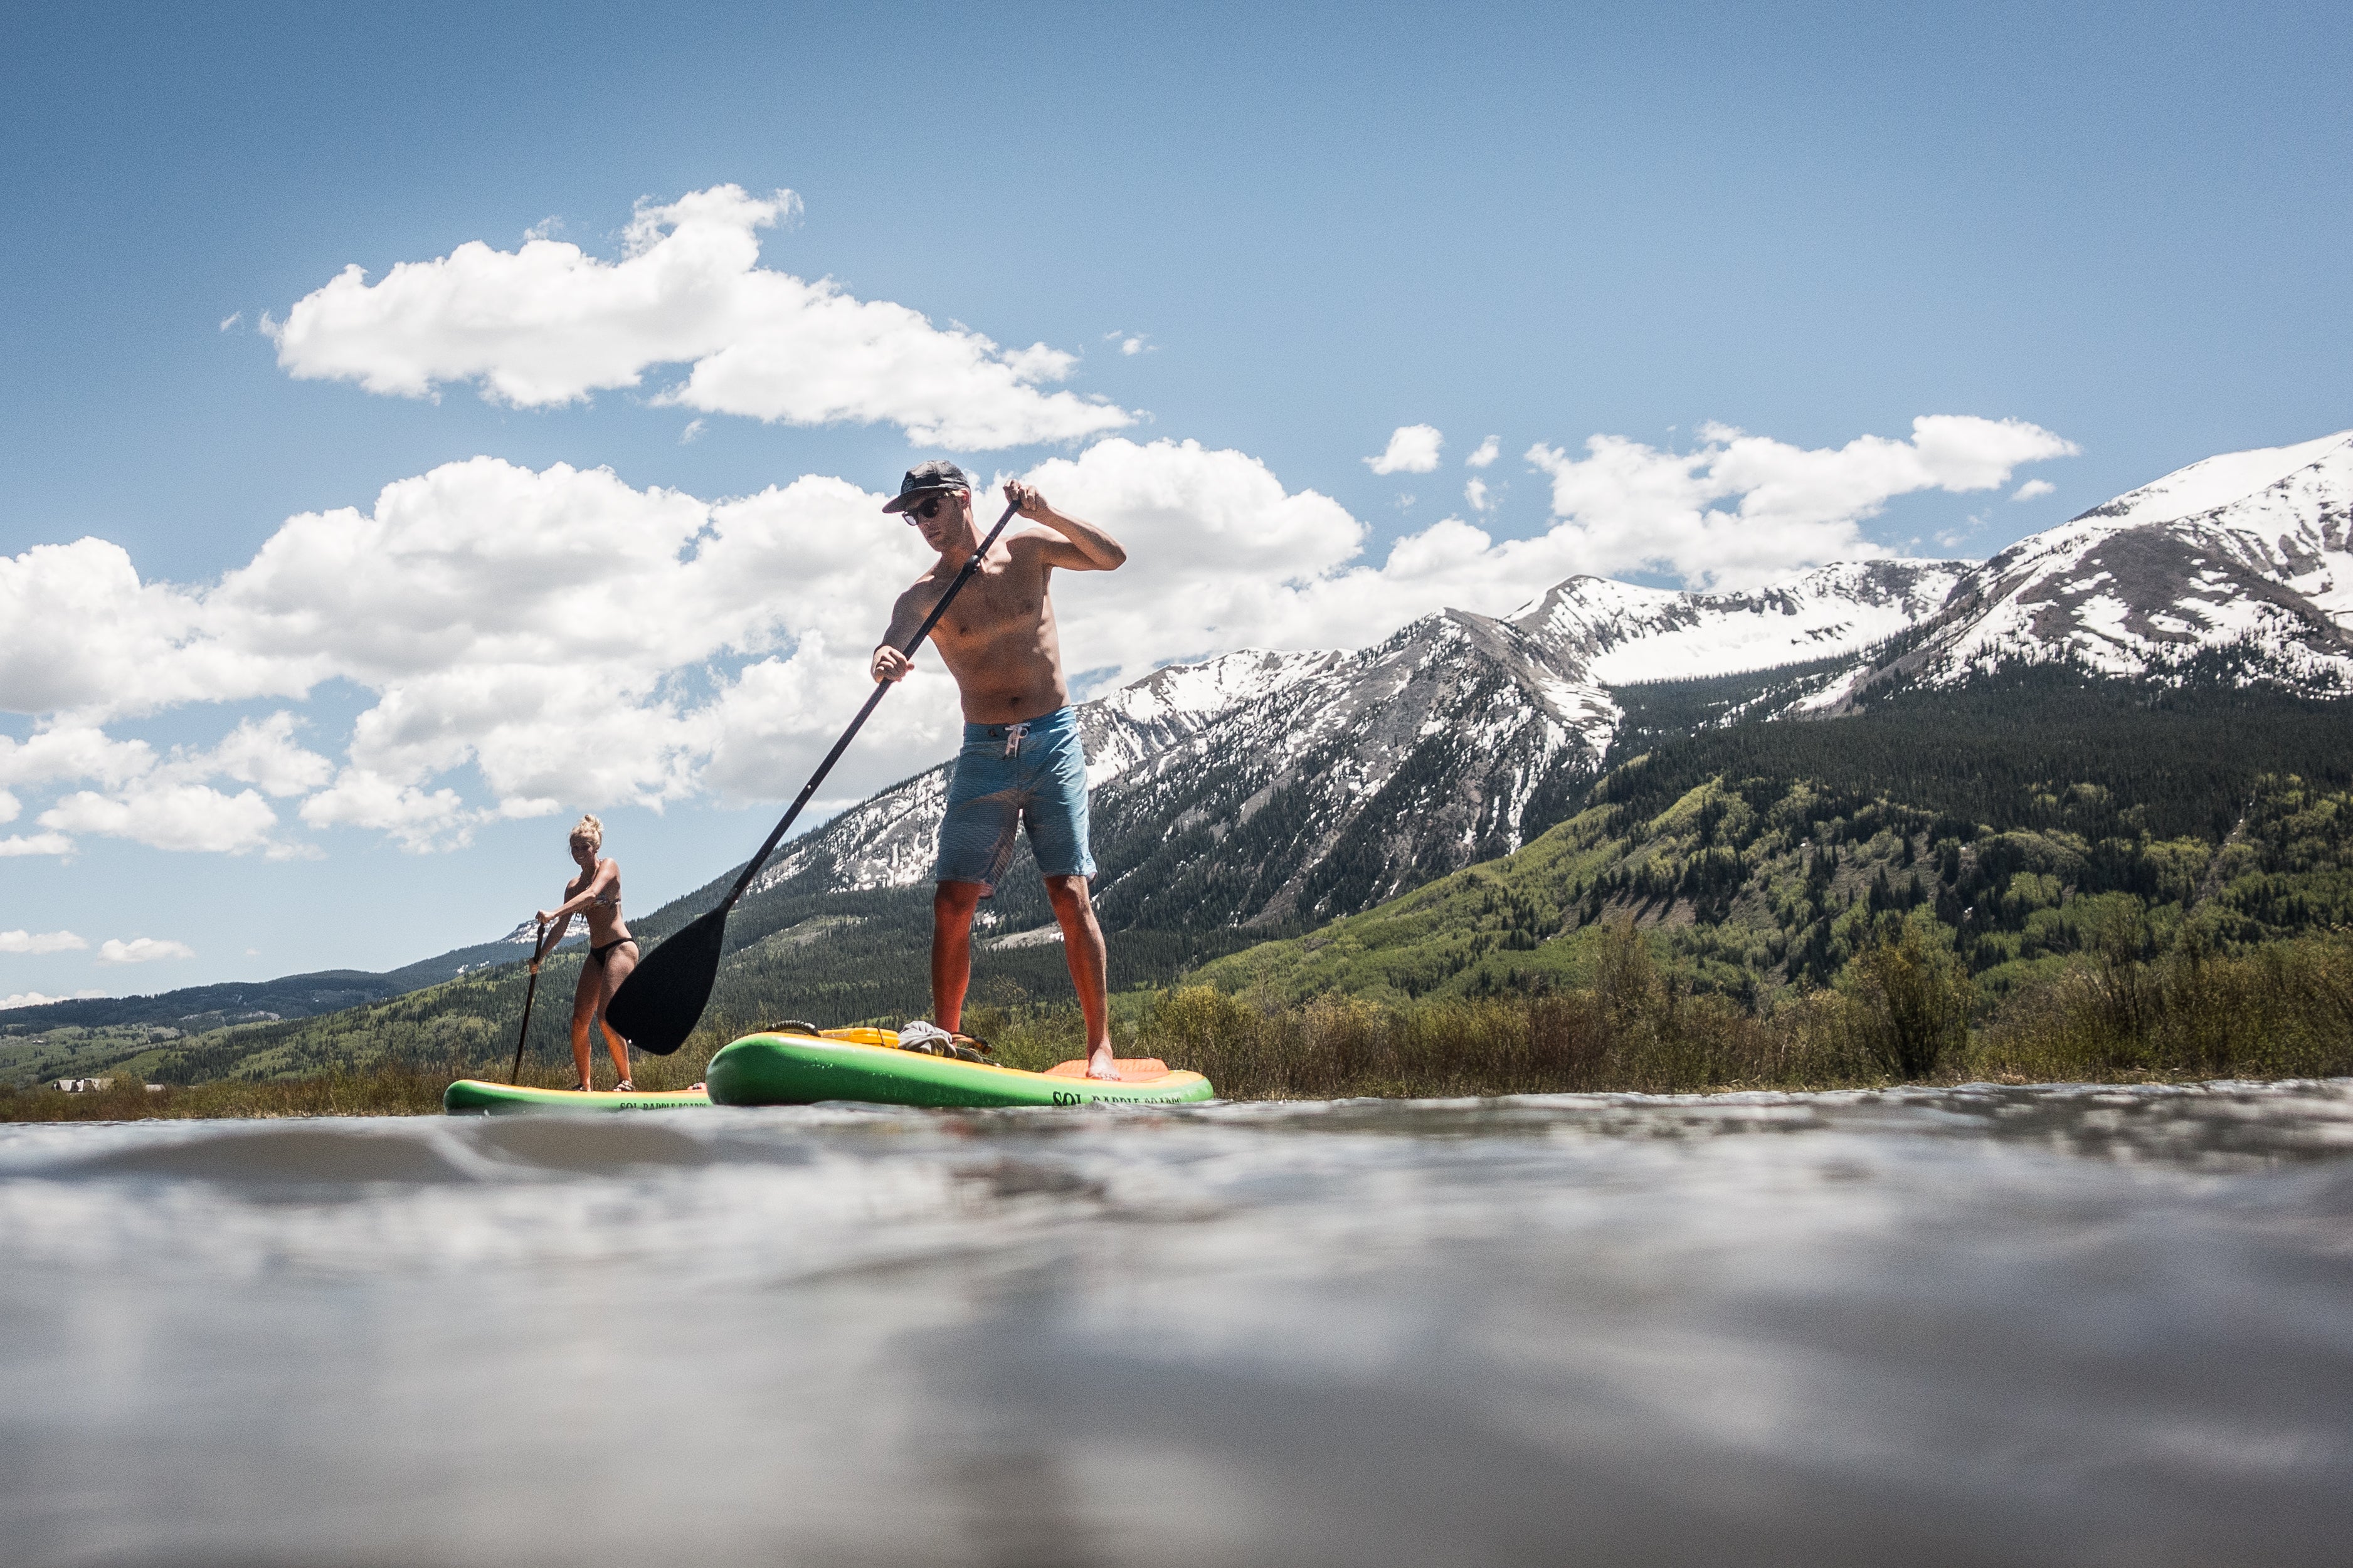 Paddleboarding the Slate River in nearby Crested Butte, CO just 15 minutes from camp.